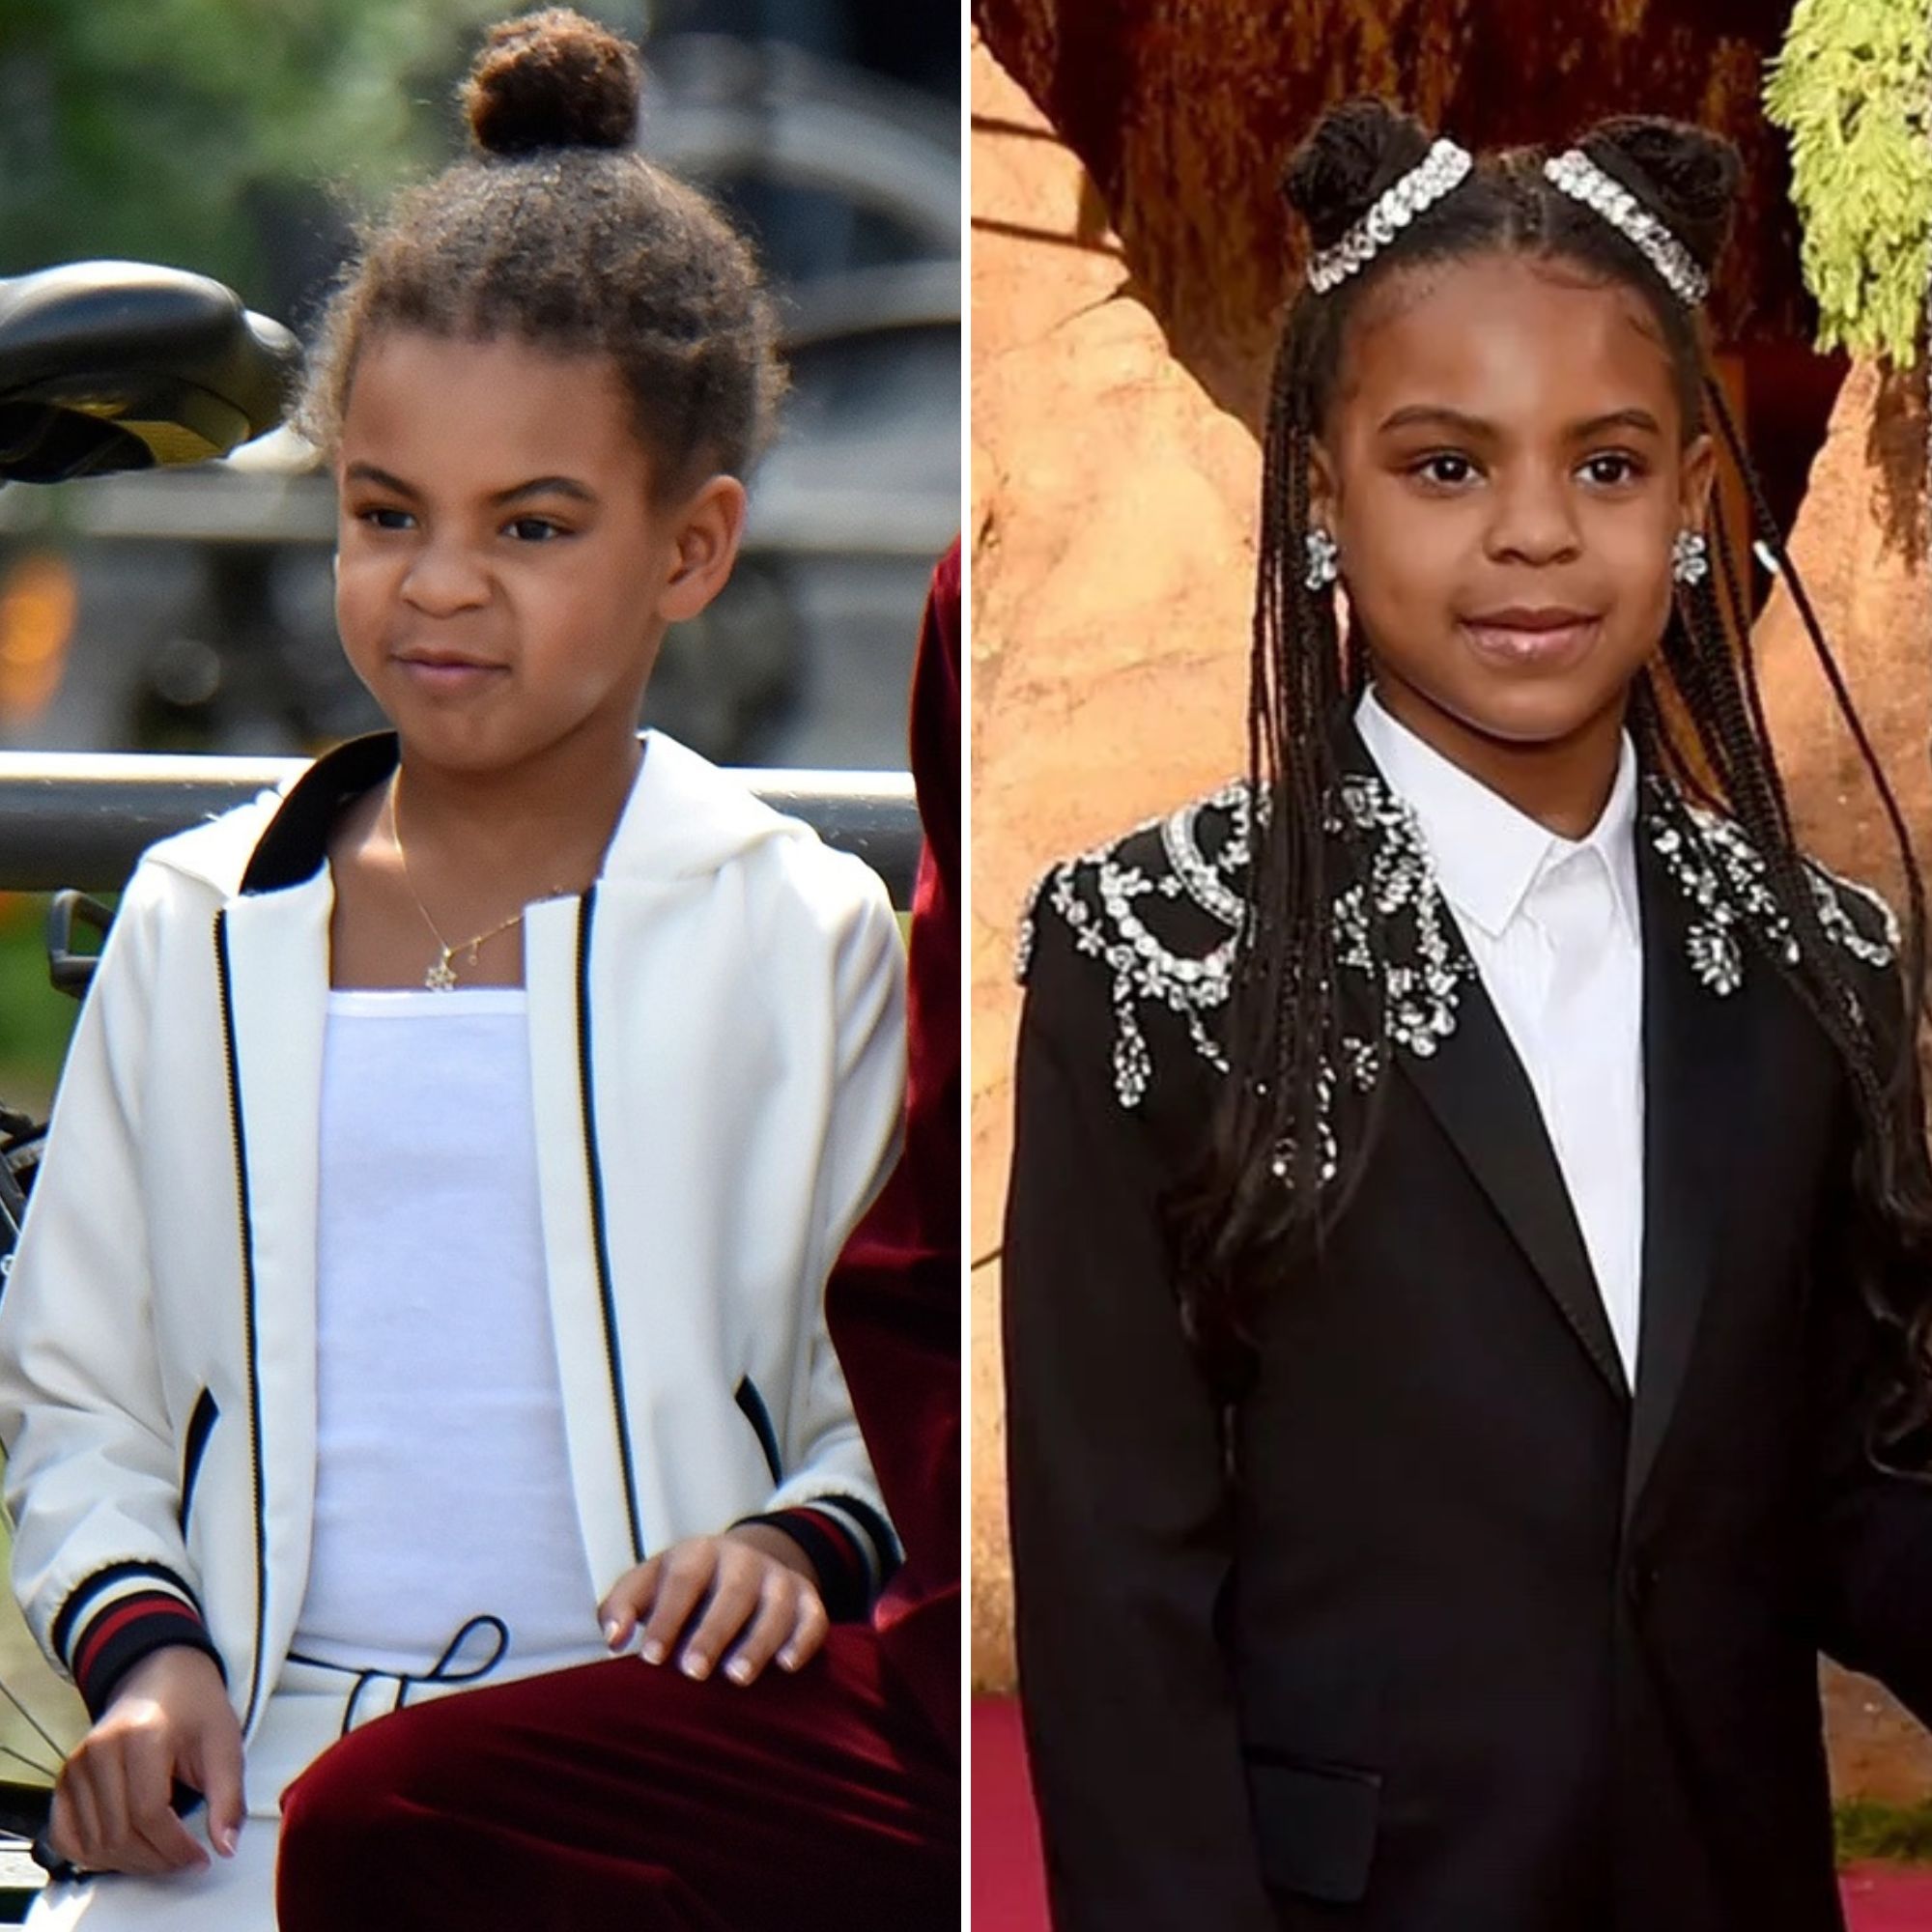 https://www.lifeandstylemag.com/wp-content/uploads/2020/07/blue-ivy-pics.jpg?fit=2000%2C2000&quality=86&strip=all